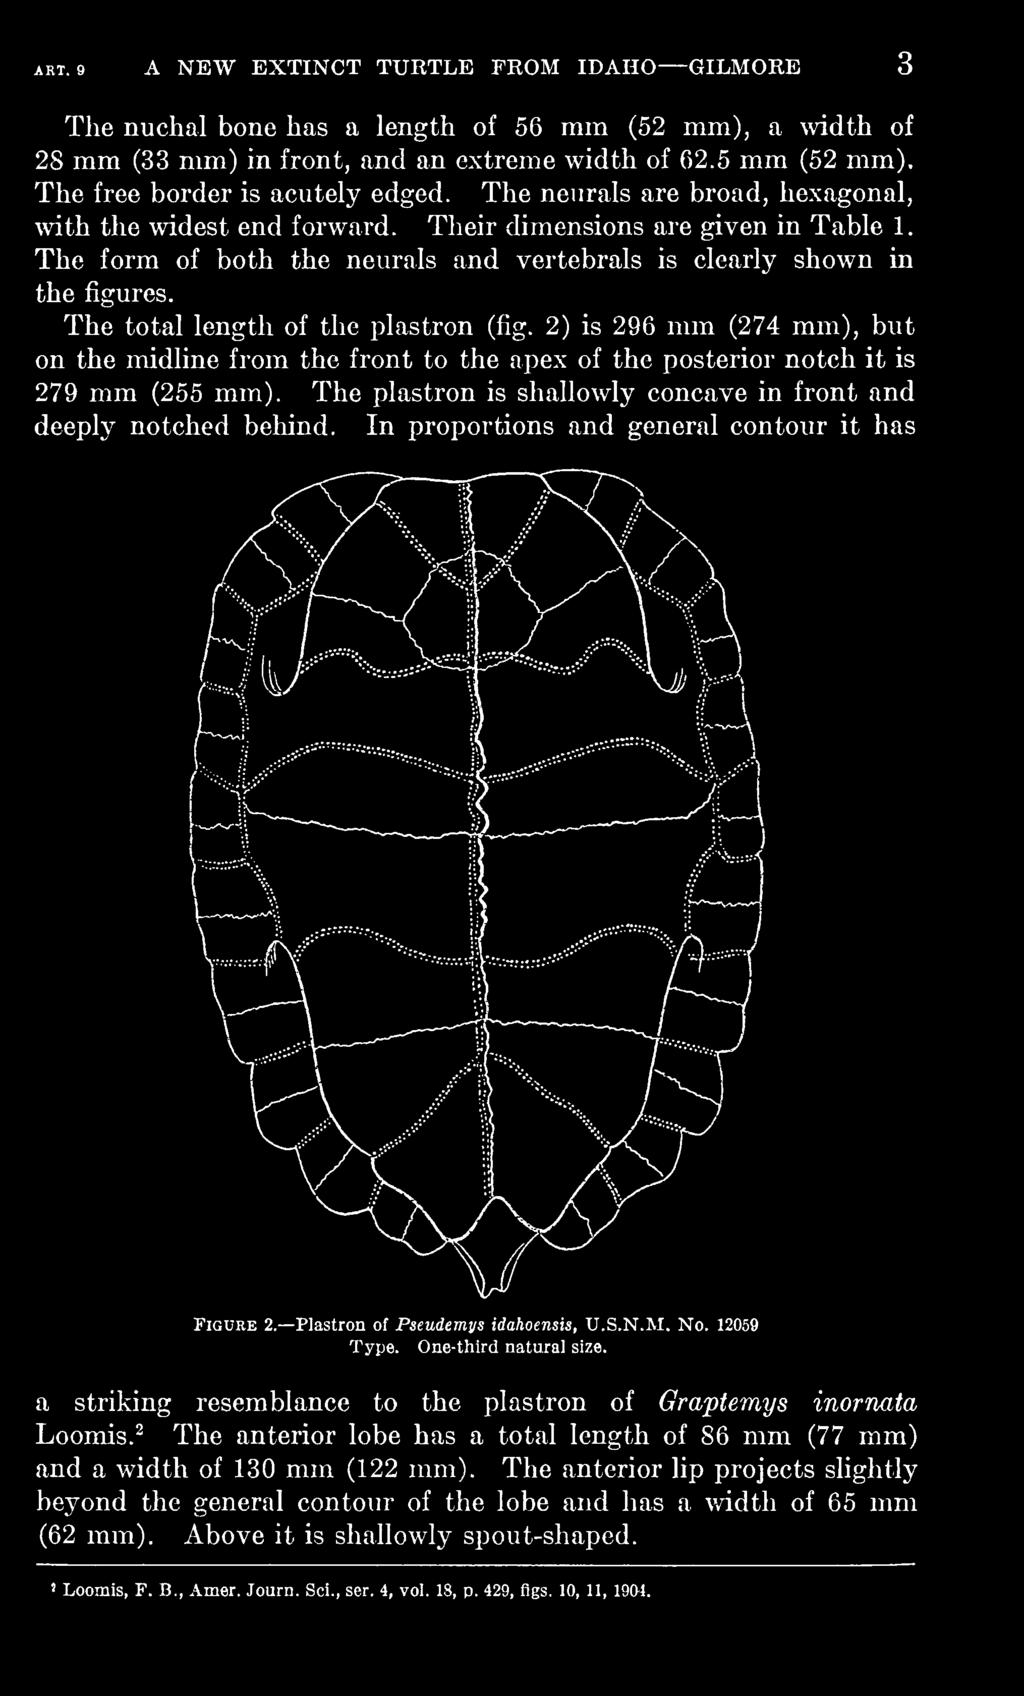 In proportions and general contour it has Figure 2. Plastron of Pseudemys idahoensis, U.S.N.M. No. 12059 Type. One-third natural size.